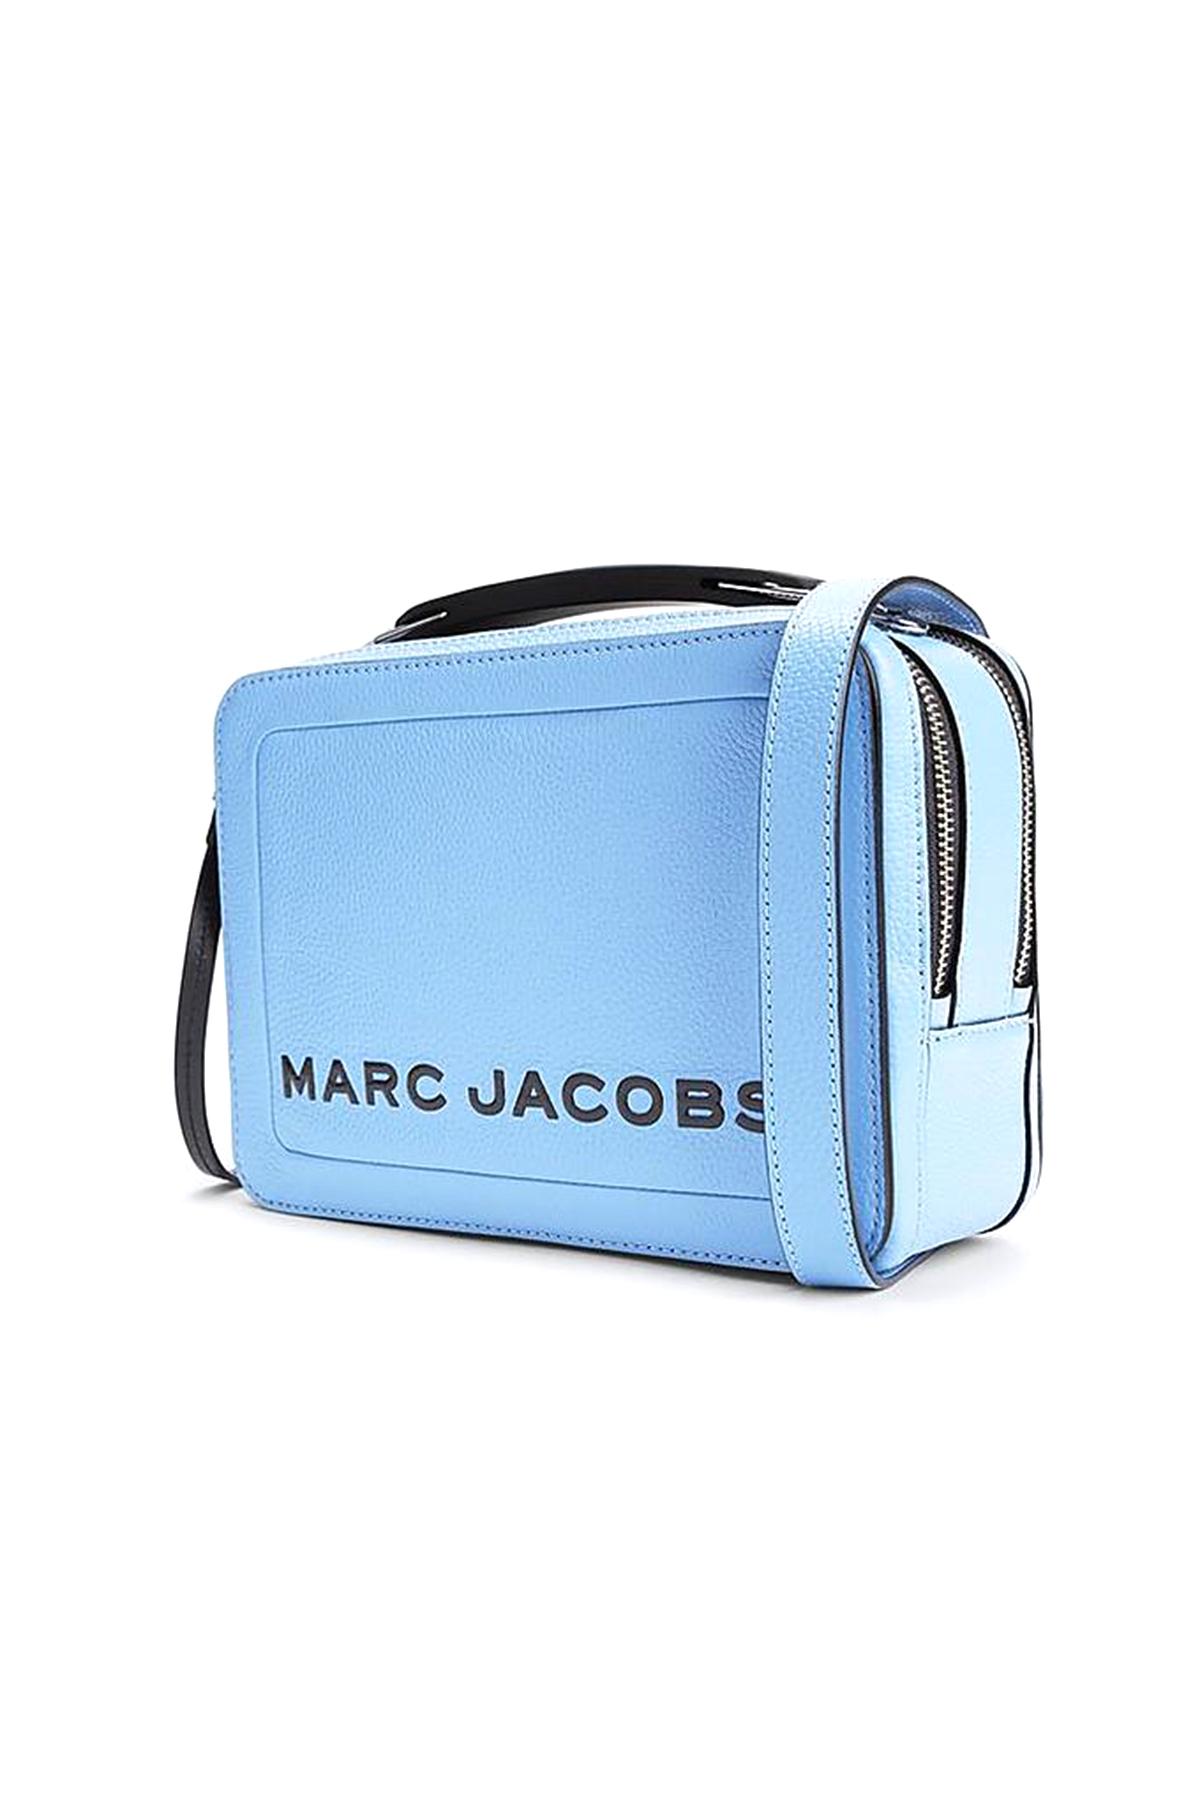 A NEW BAG IN TOWN // THE MARC JACOBS BOX BAG - Atlantic-Pacific